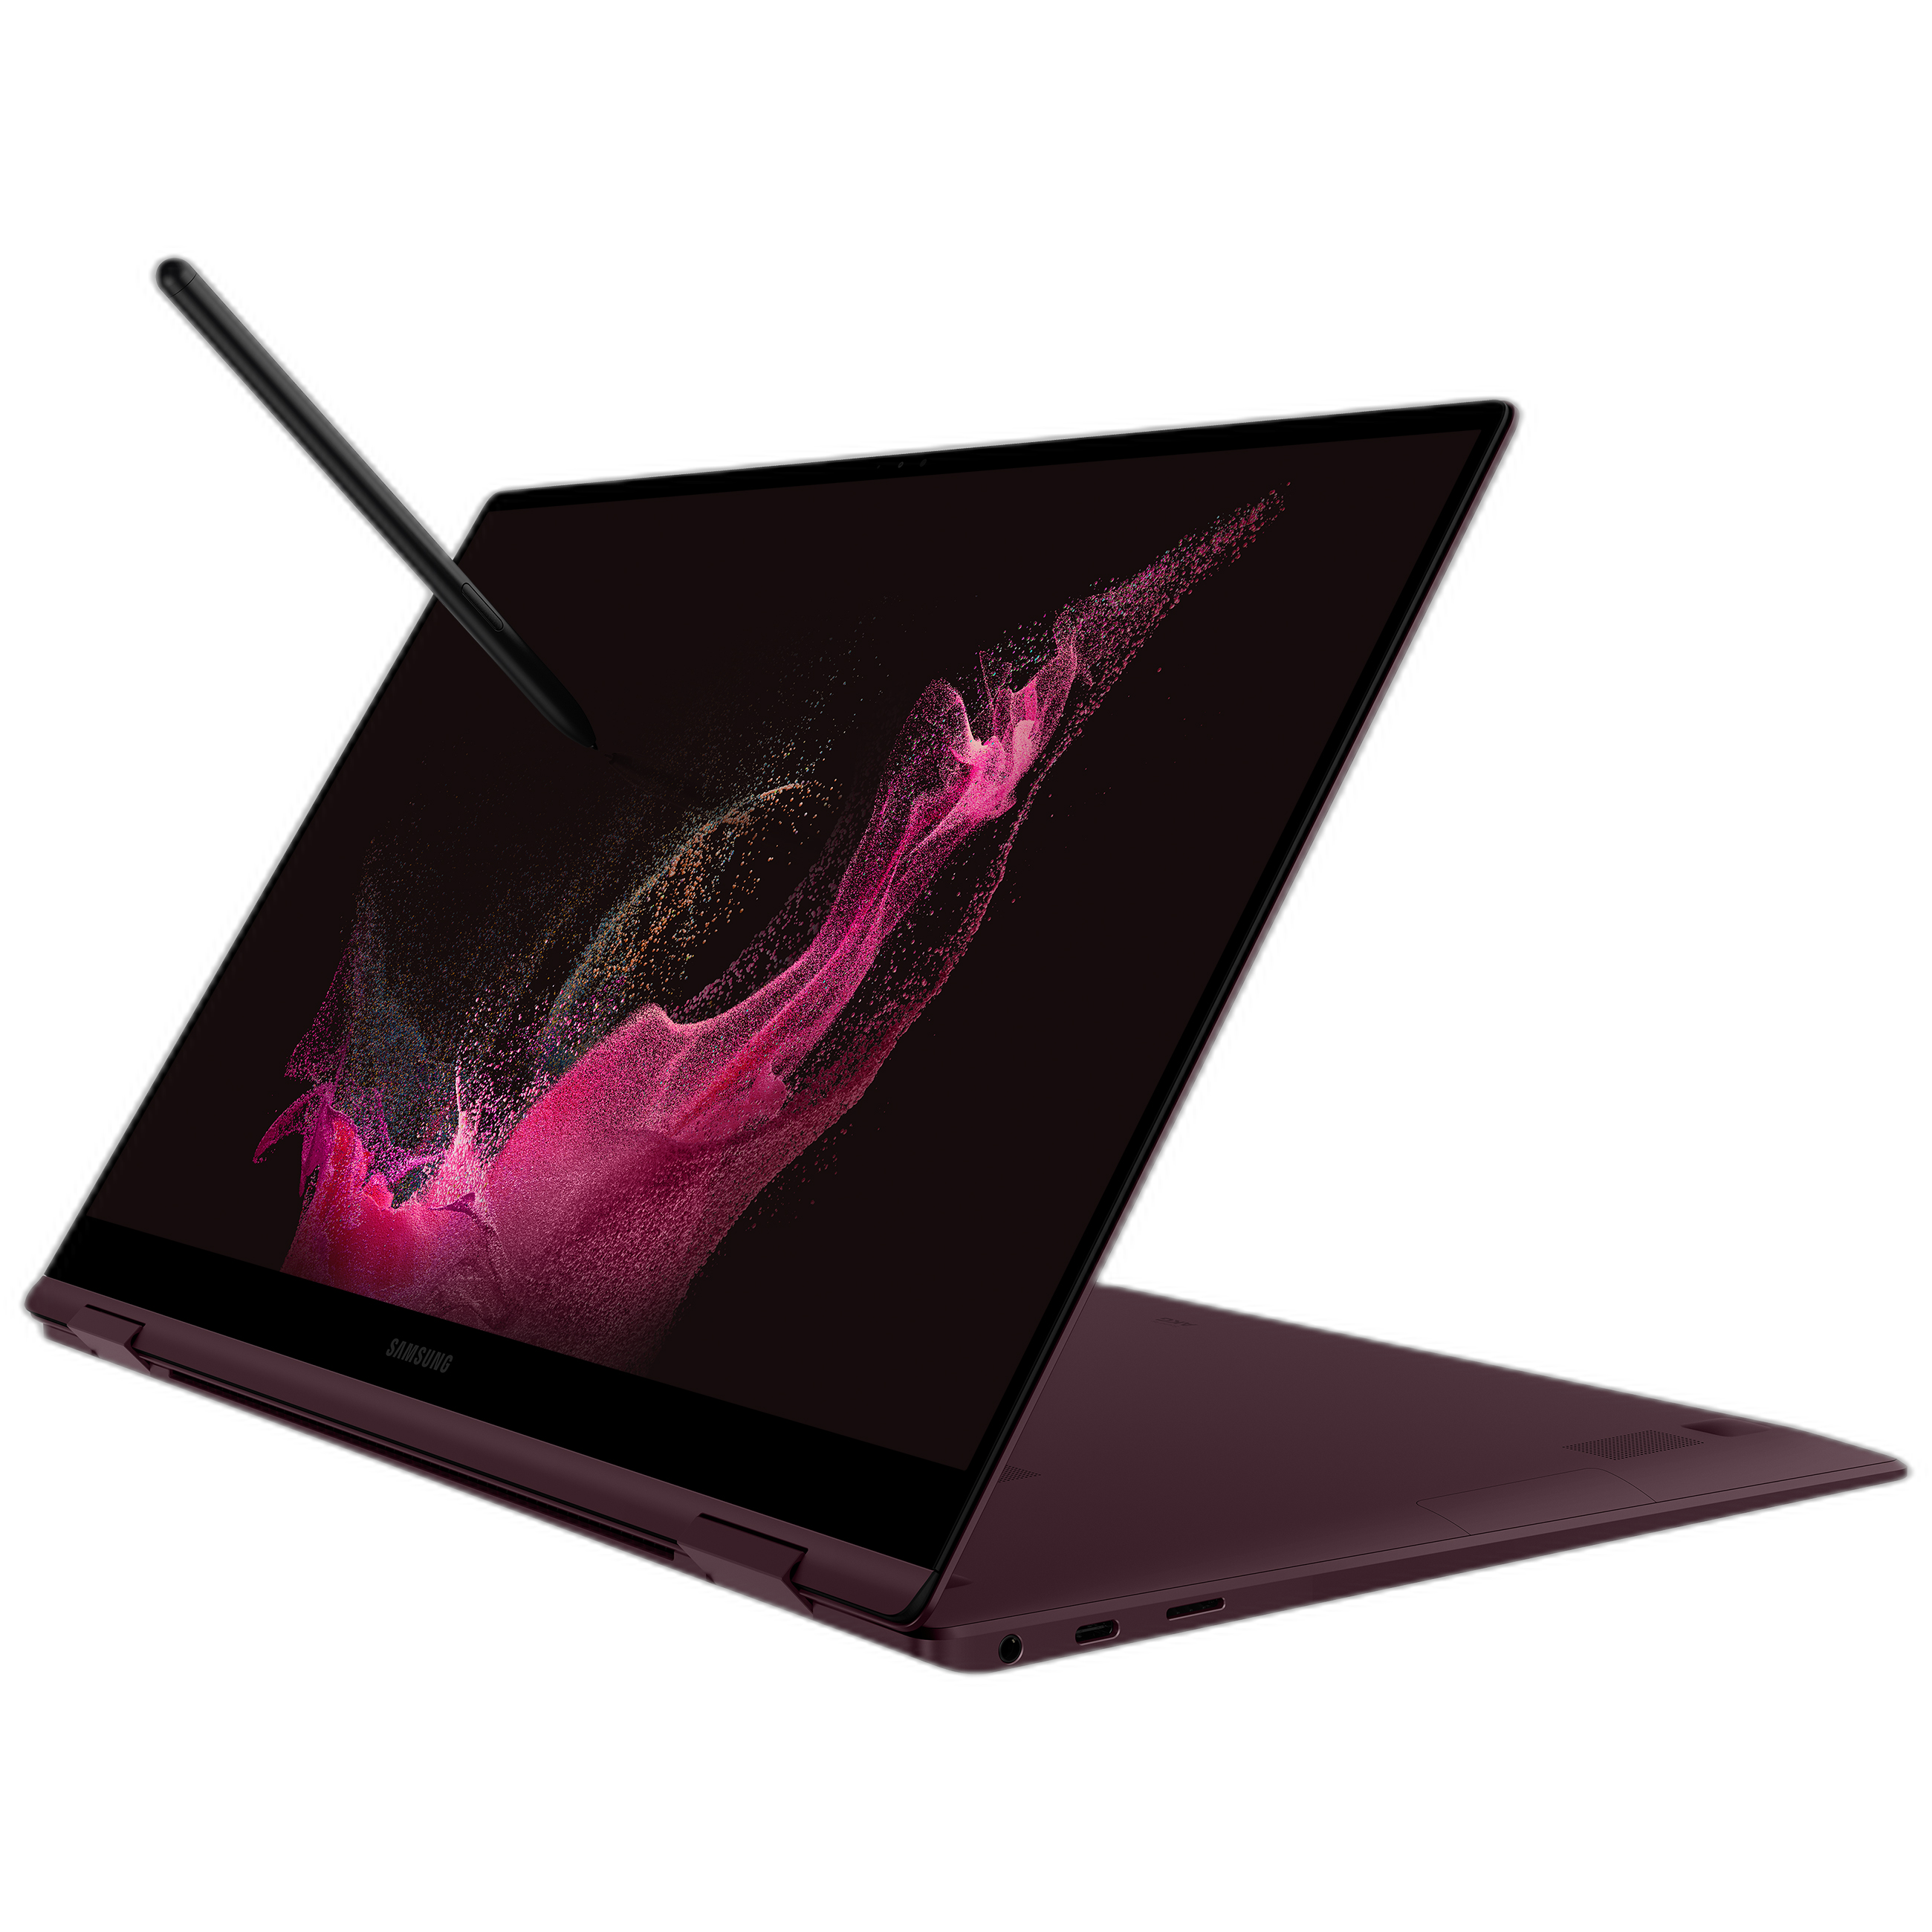 Samsung Galaxy Book 2 Pro 360 laptop in stand mode with an S Pen on the screen